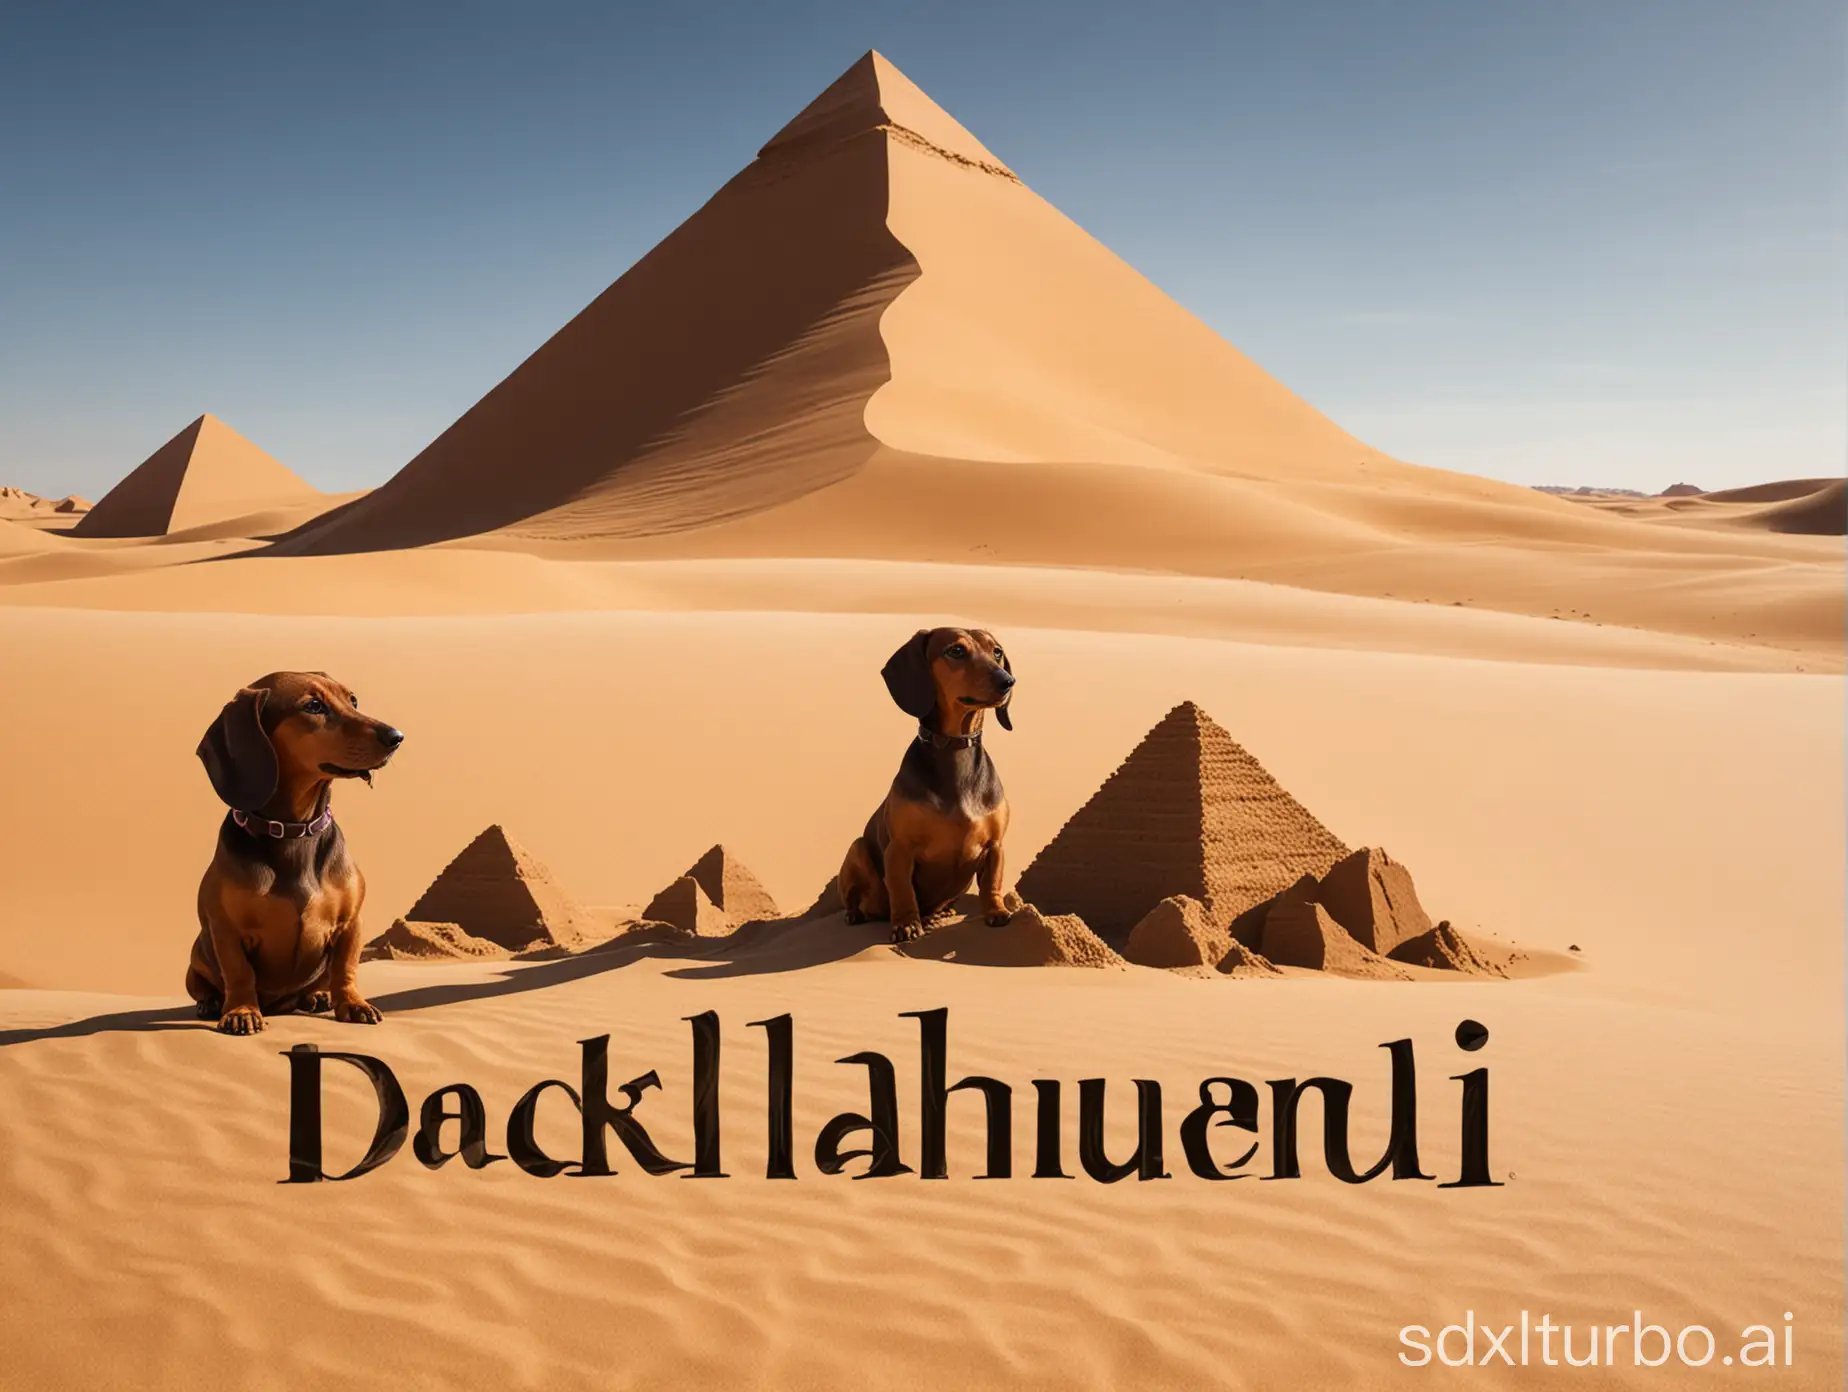 Dachshund logo, with background of sand dunes and pyramids, shadows